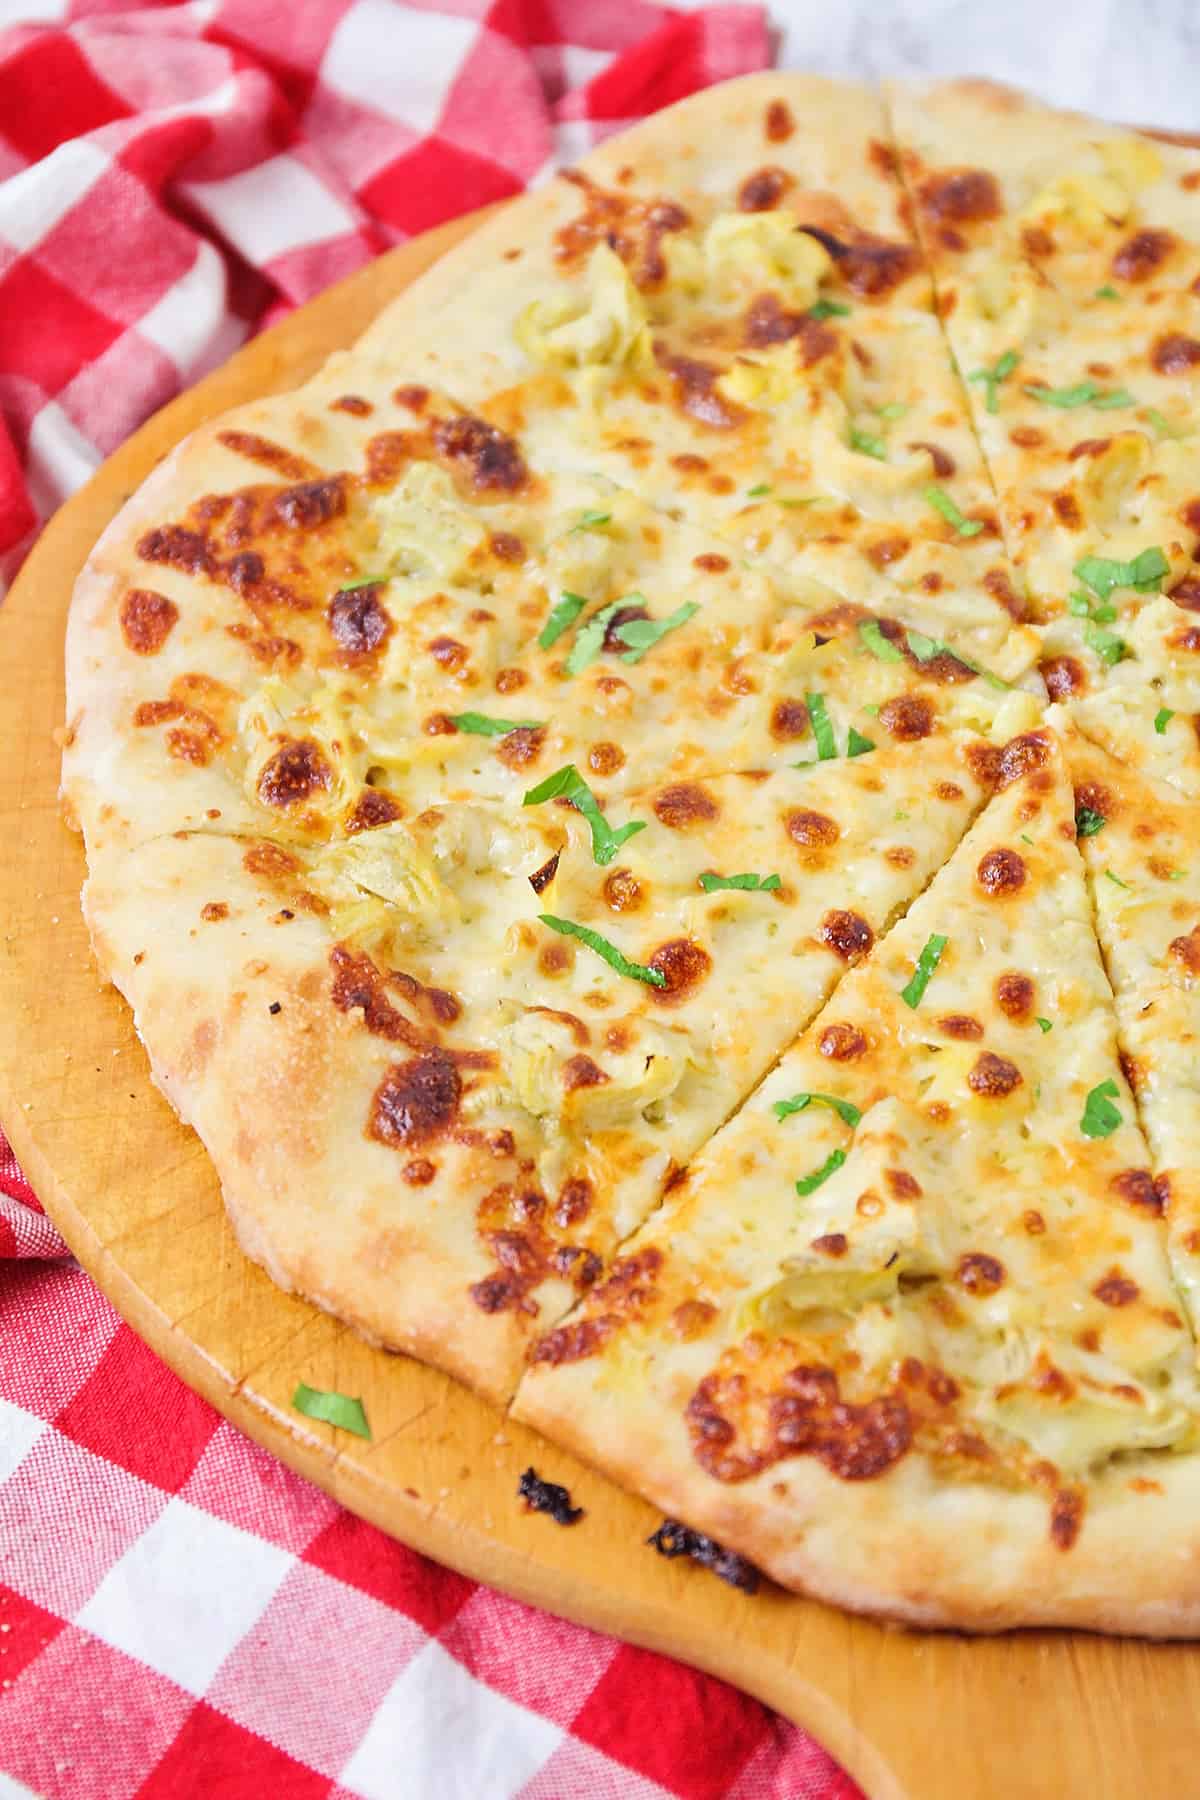 Close up of artichoke pizza sliced and garnished with herbs.